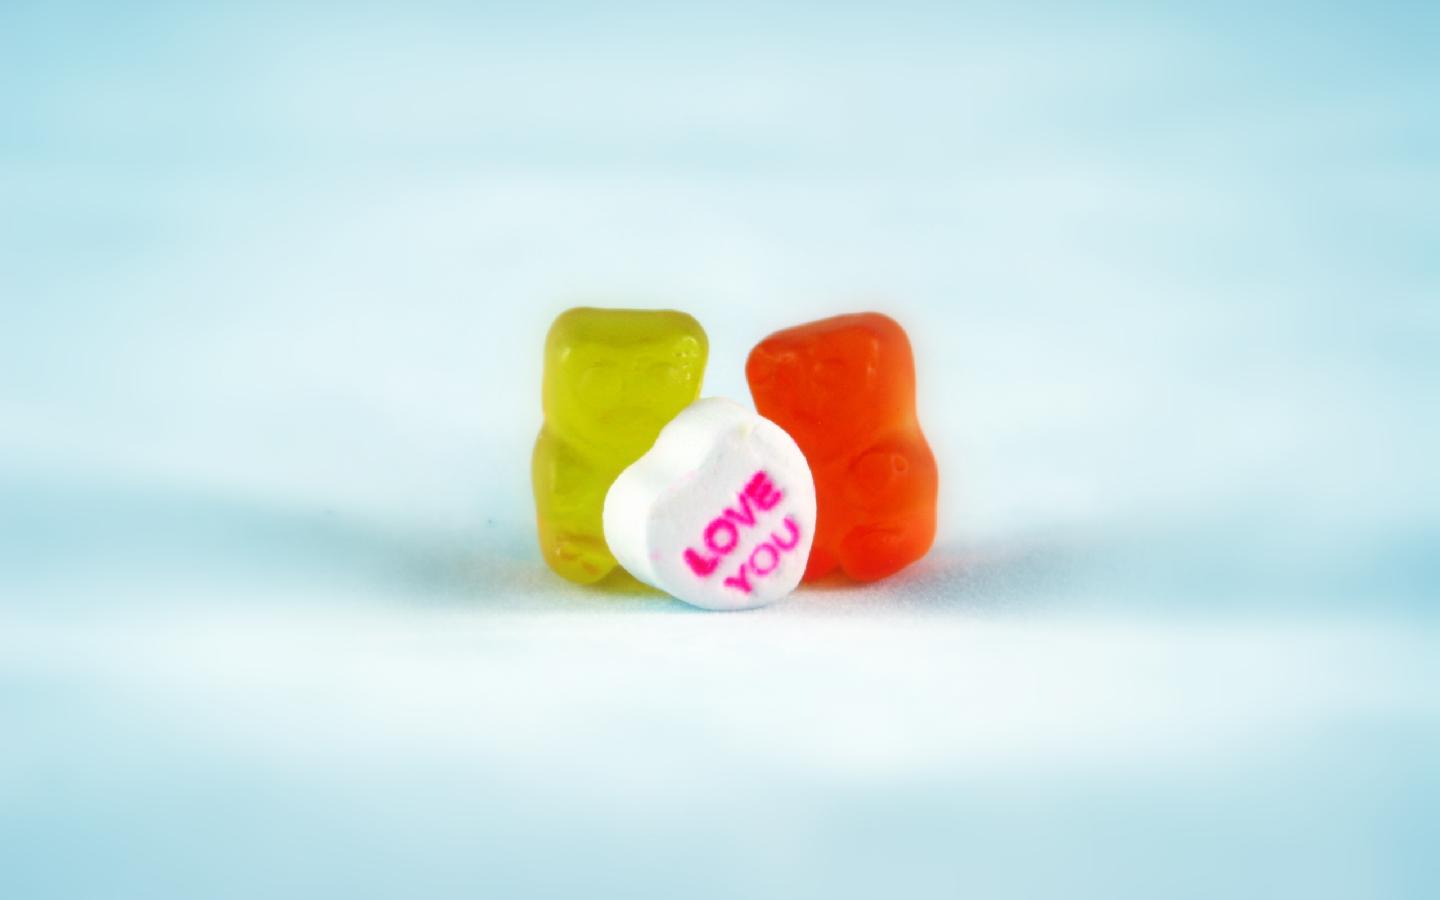 Rate Select Rating Give Gummy Bears Love